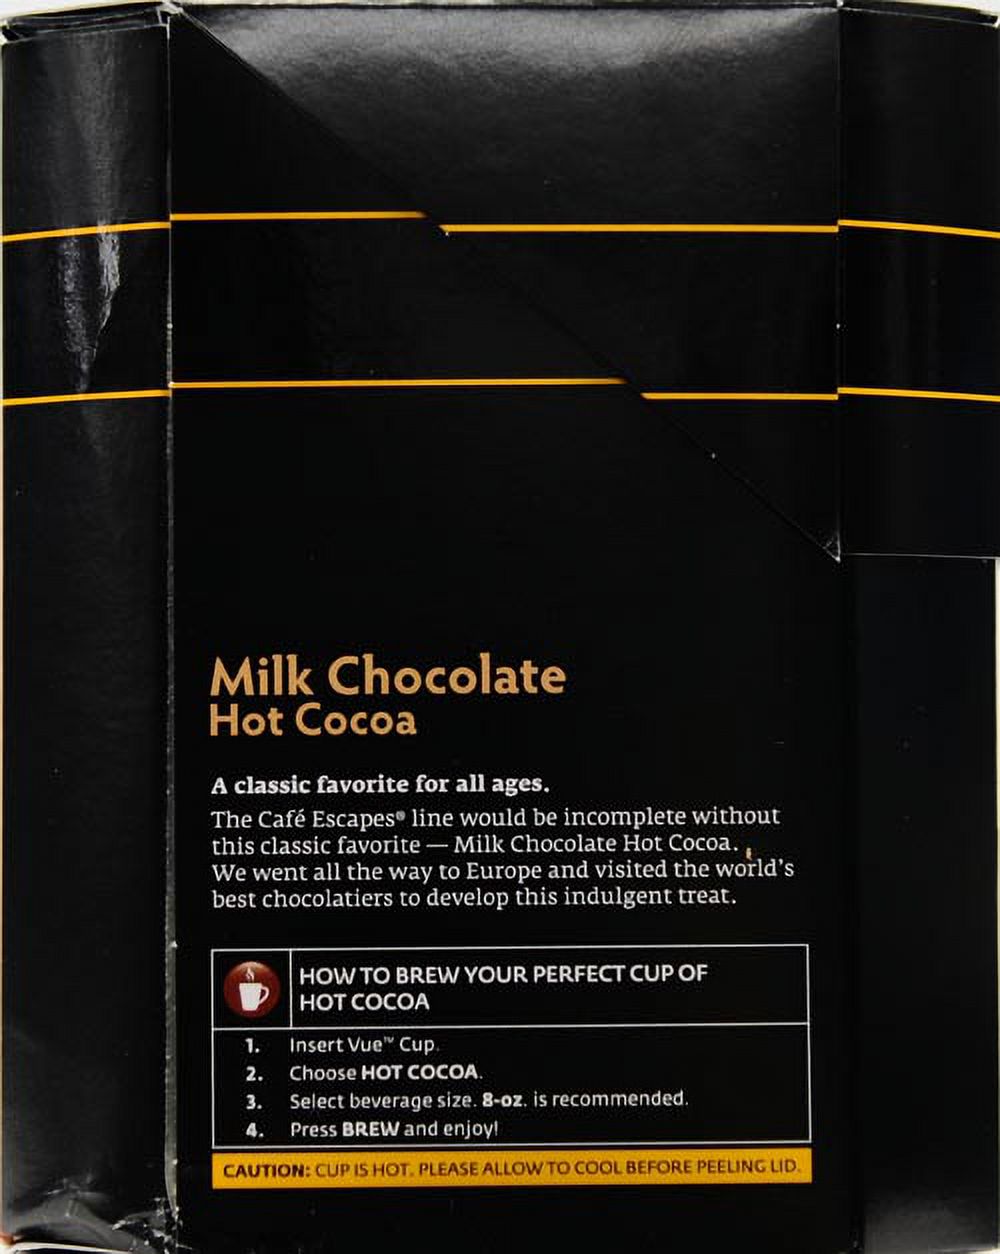 Keurig Vue Pack Cafe Escapes Milk Chocolate Hot Cocoa, 16ct - image 3 of 3